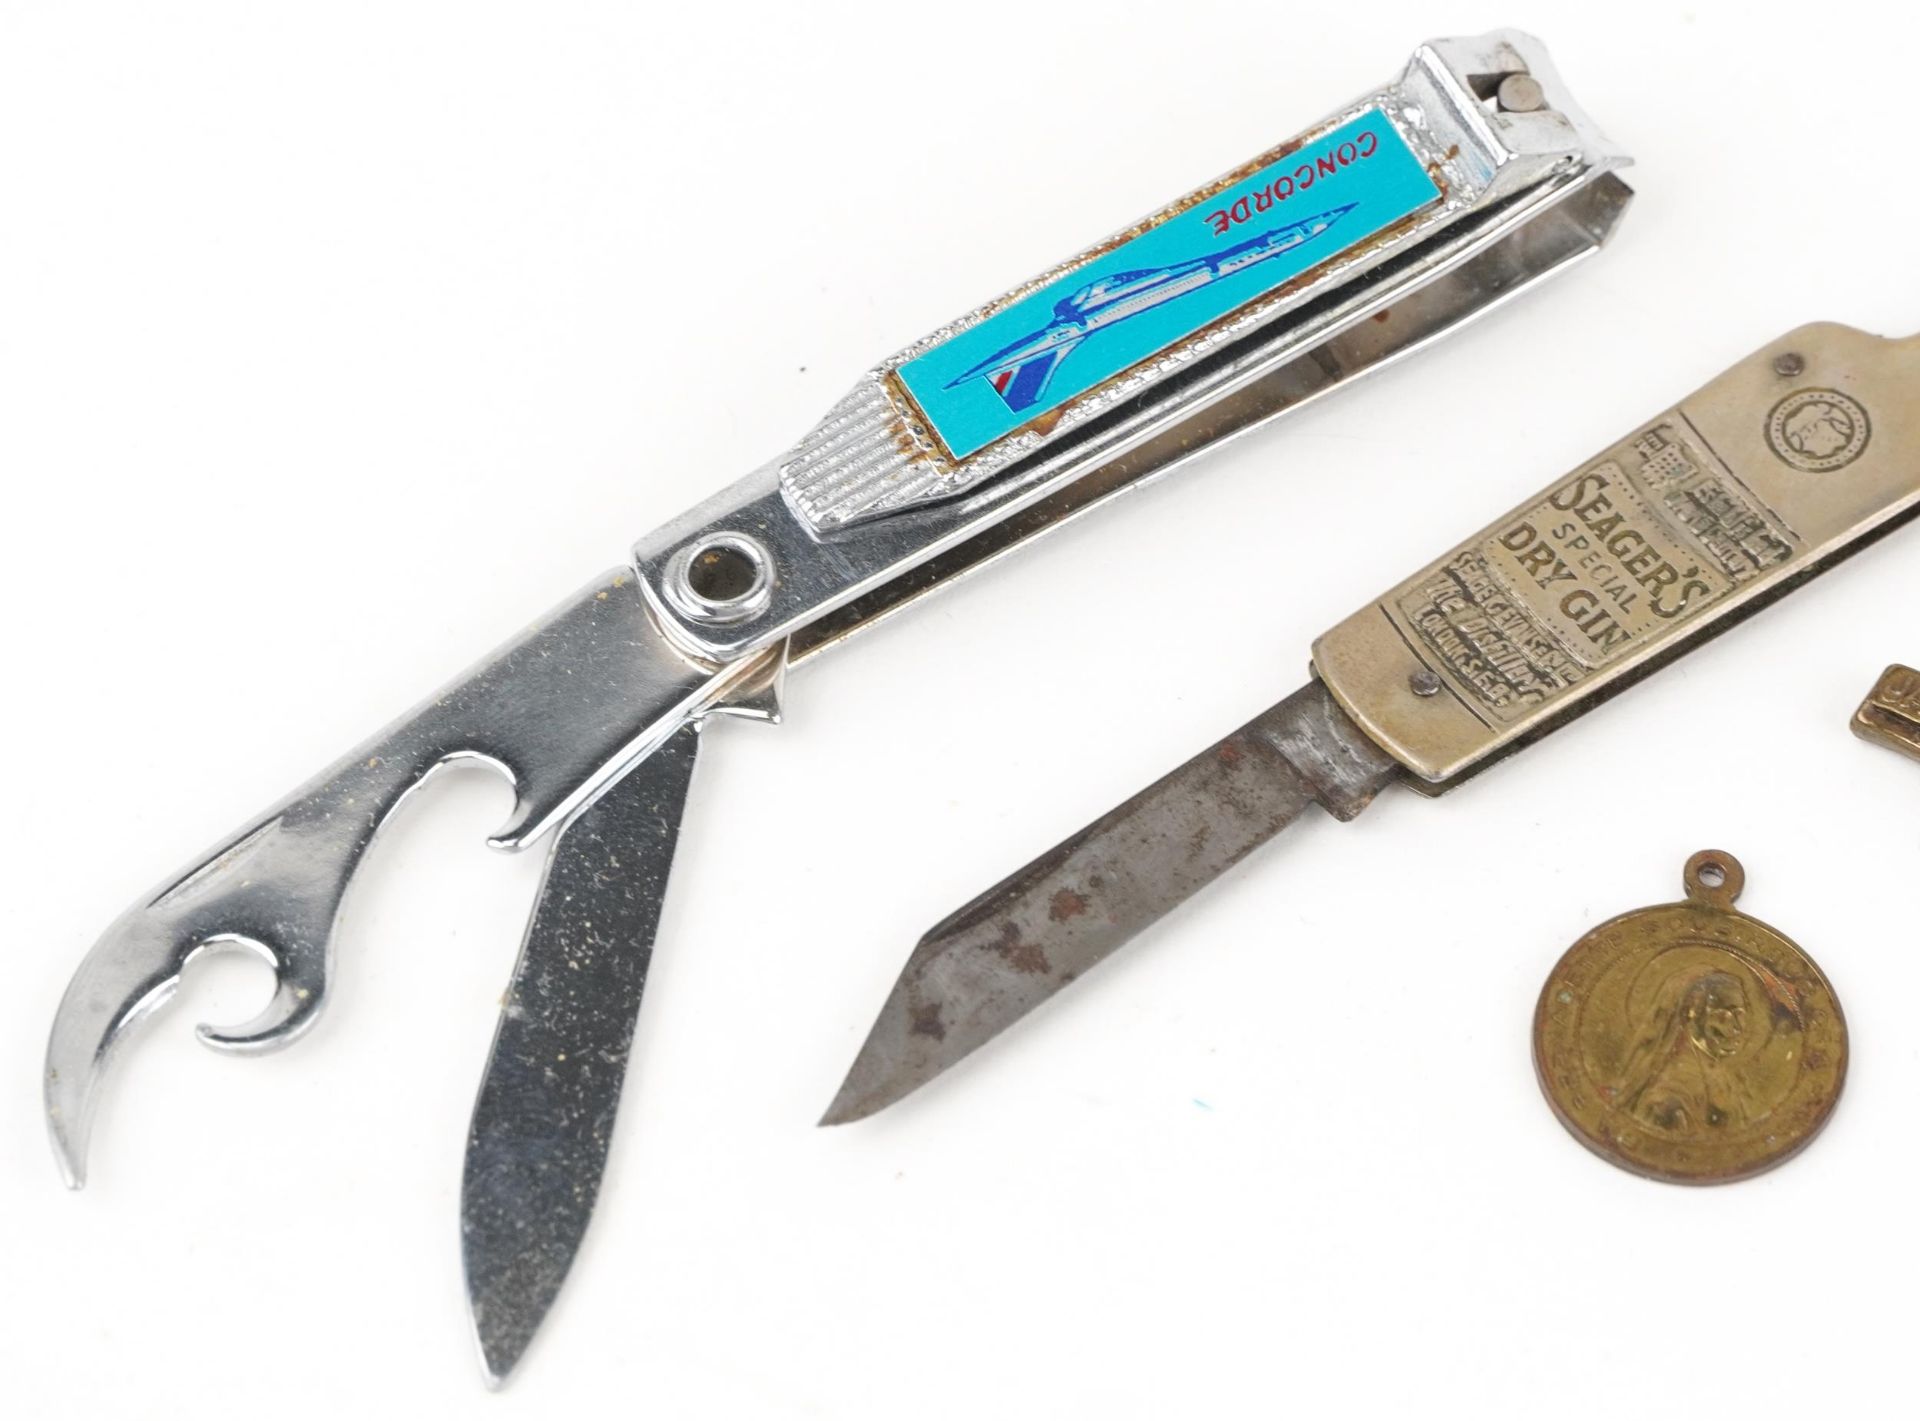 Sundry items including an aviation interest nail clippers advertising Concorde and a folding - Image 2 of 3